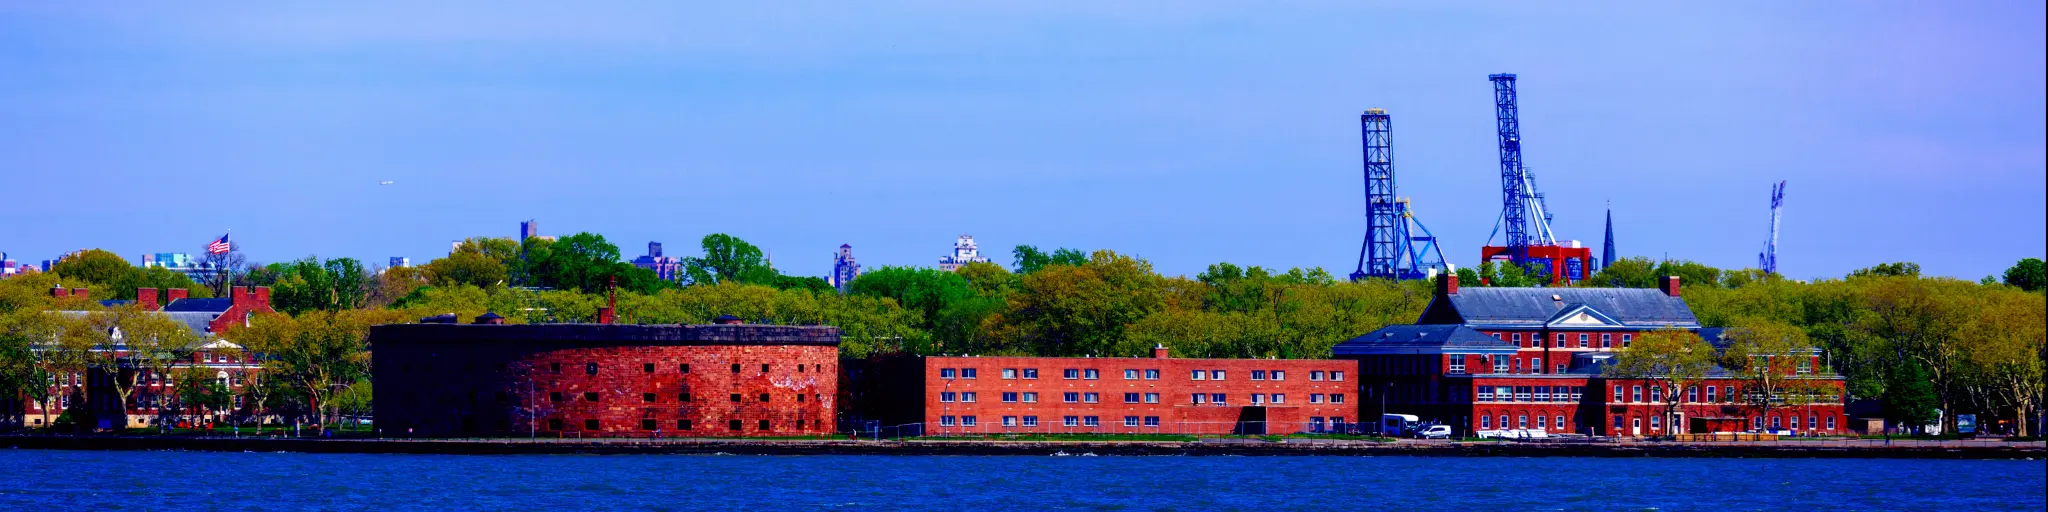 A worm's eye view of Castle Williams of General Island from New York Harbor with trees green trees and tower in the back on a sunny day